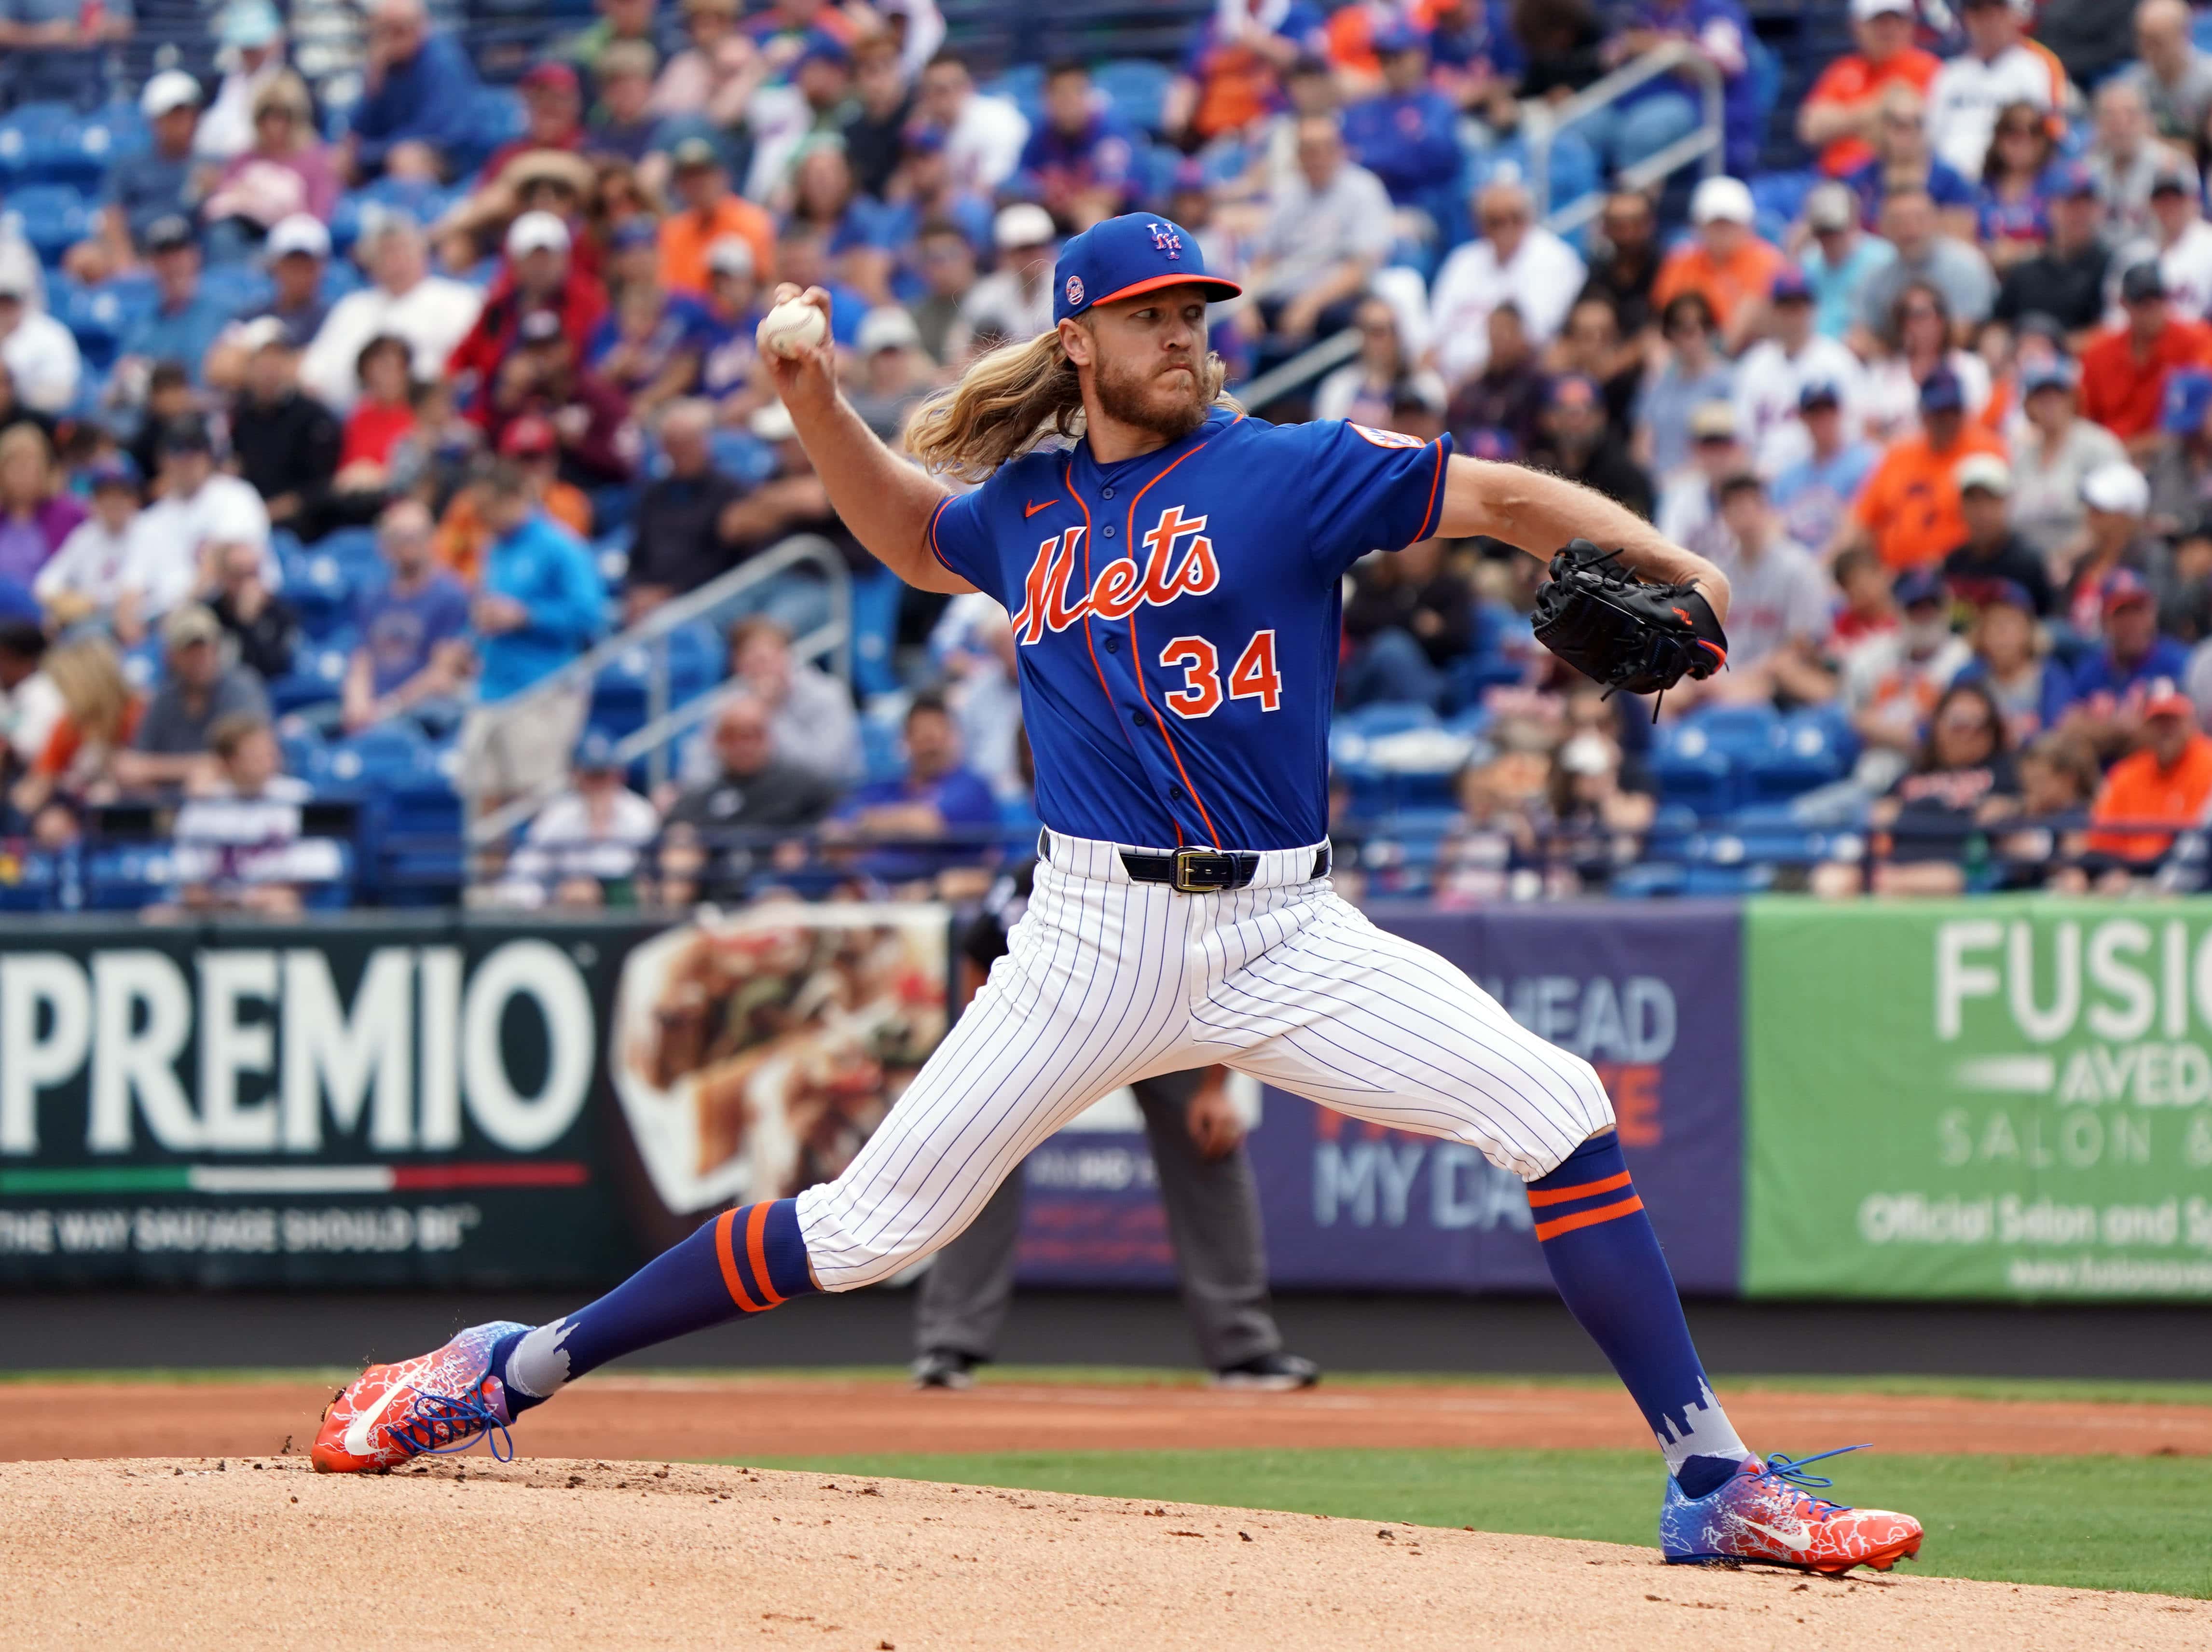 Mar 8, 2020; Port St. Lucie, Florida, USA; New York Mets starting pitcher Noah Syndergaard (34) throws in the first inning Houston Astros at Clover Park. Mandatory Credit: Steve Mitchell-USA TODAY Sports